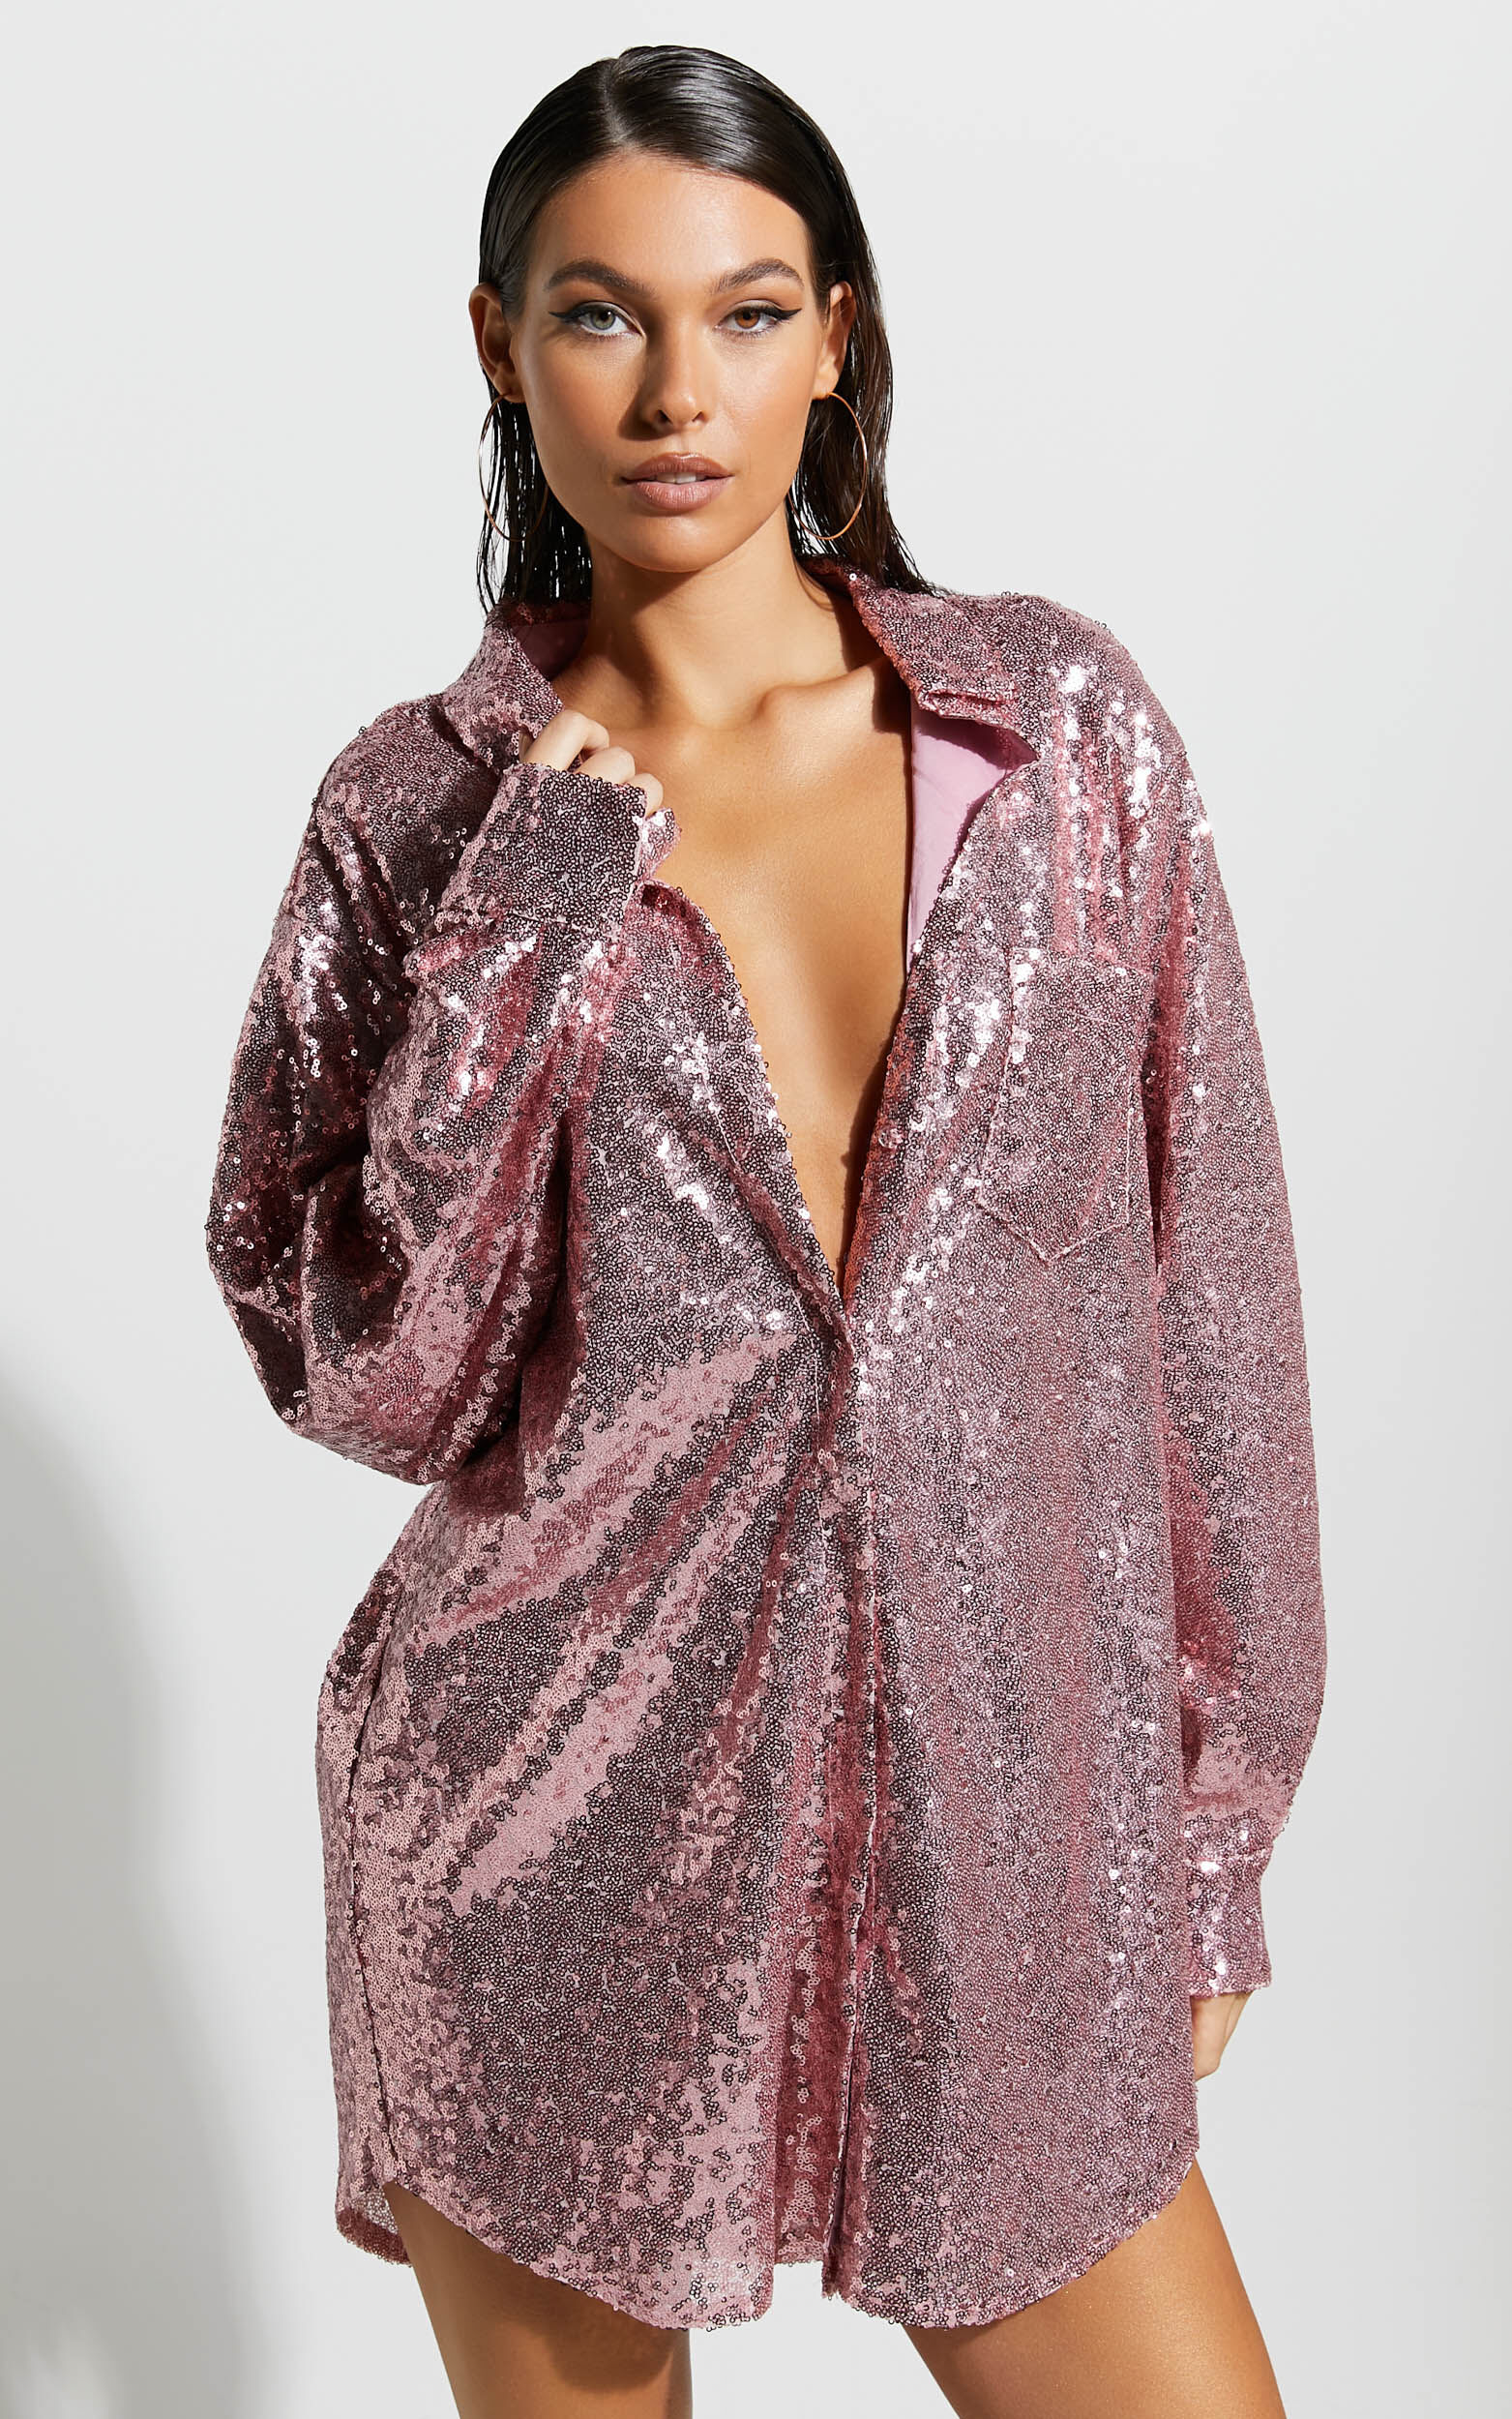 Cally Mini Dress - Oversized Shirt Dress in Lilac Sequin - 14, PRP3